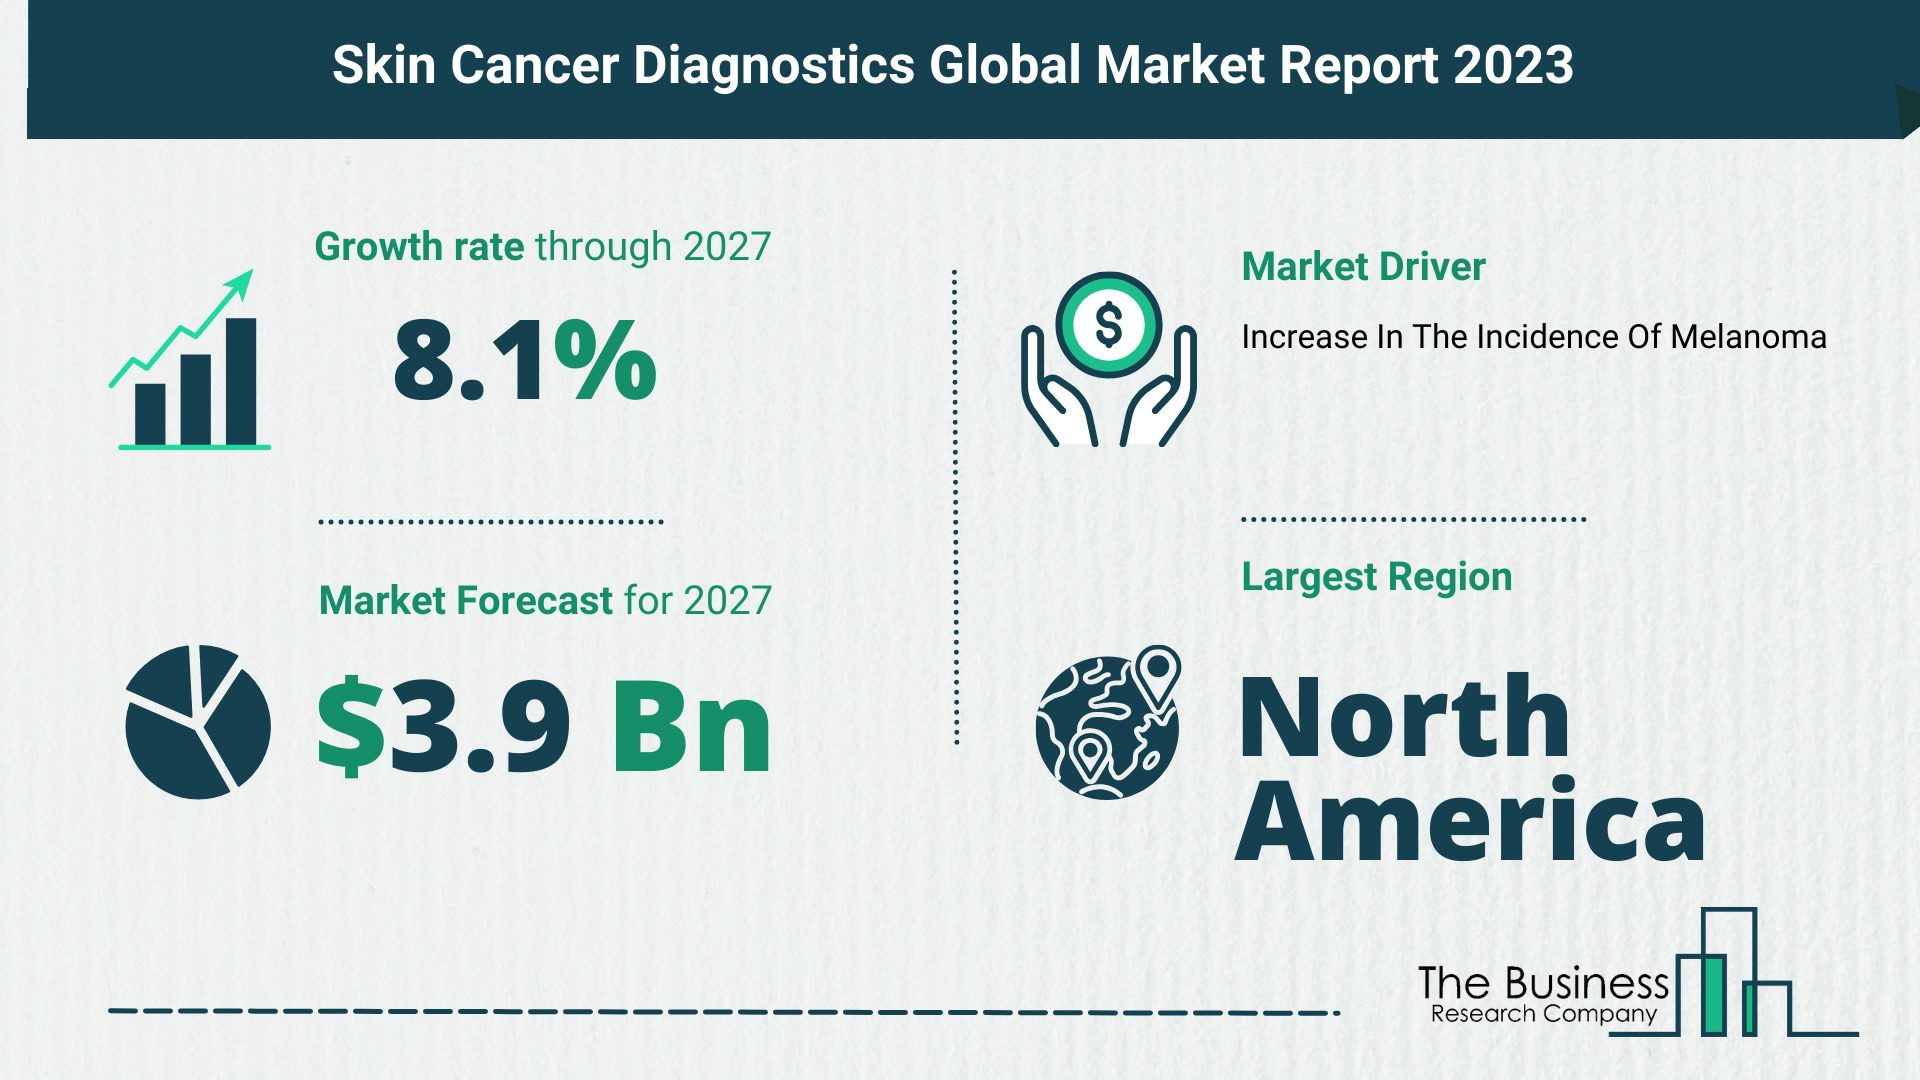 What Is The Forecast Growth Rate For The Skin Cancer Diagnostics Market?